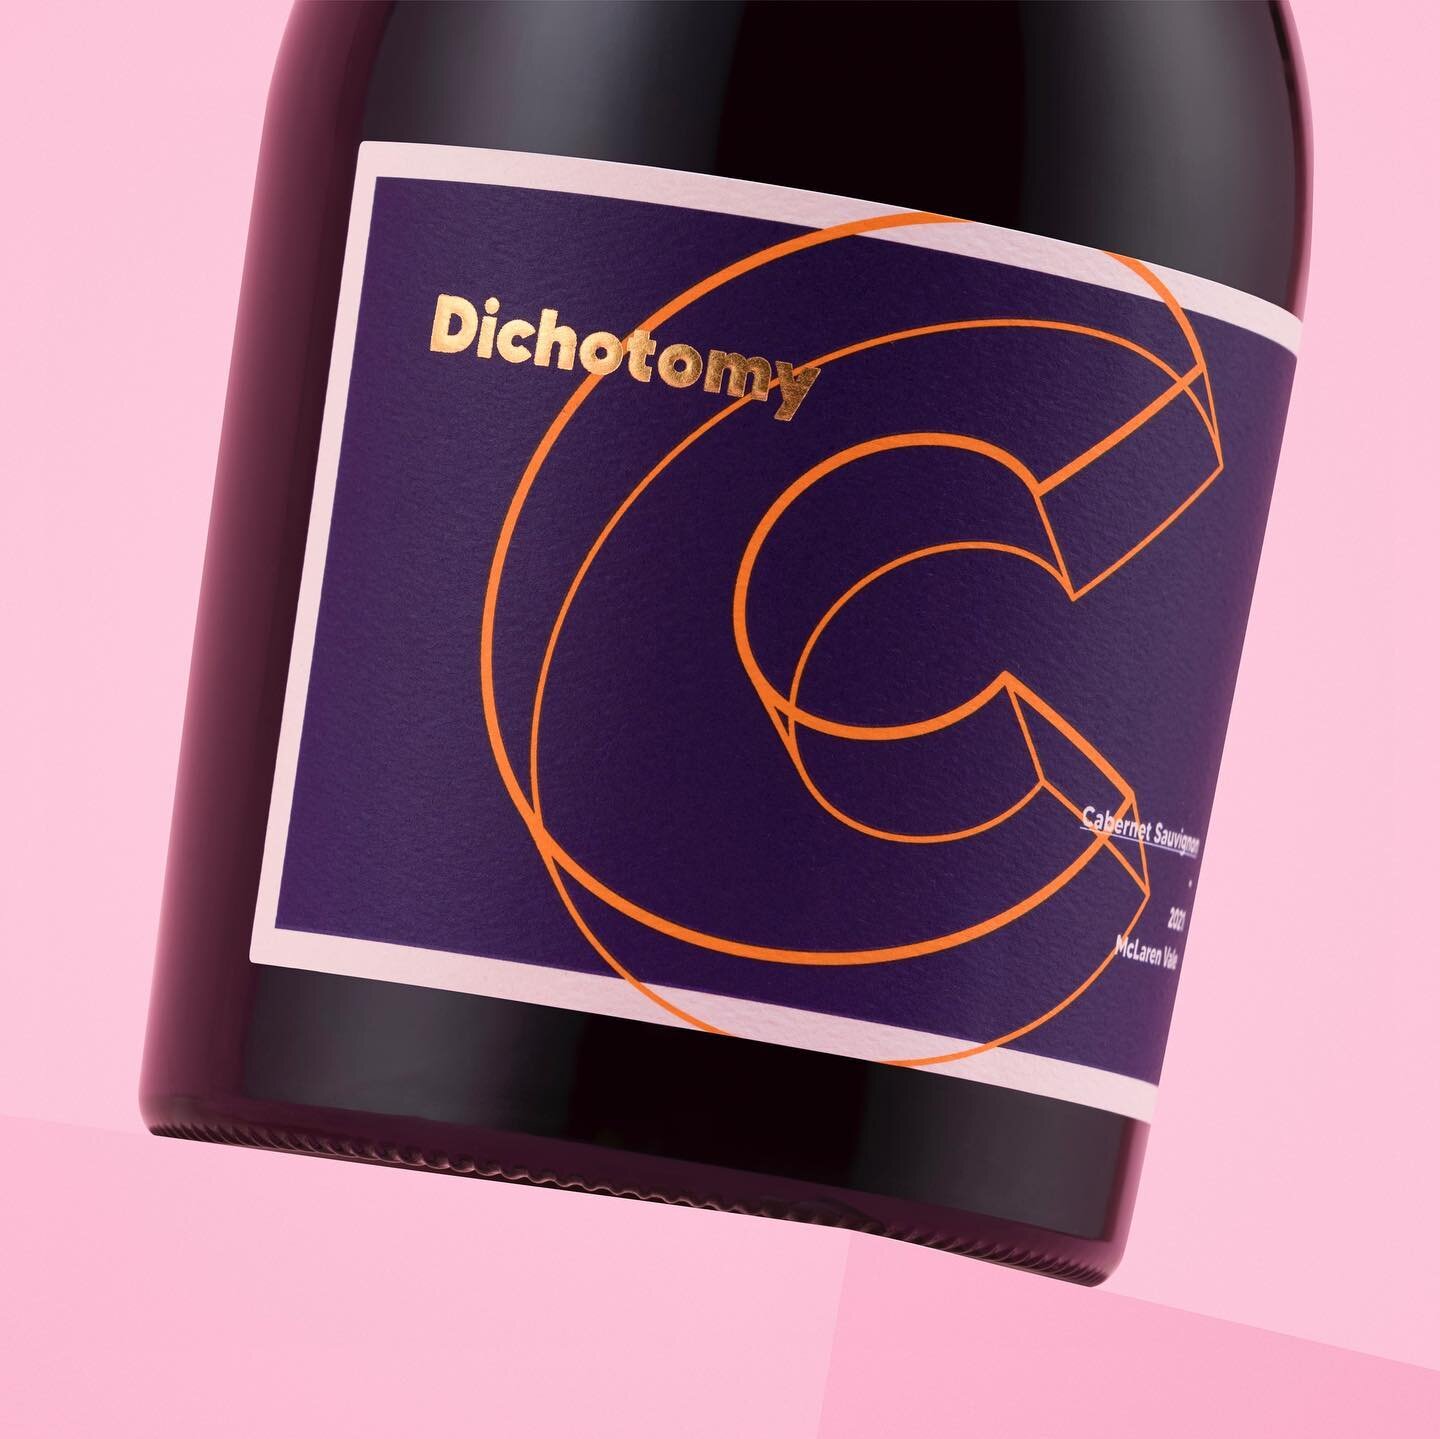 NEW WORK &mdash; Introducing @dichotomywines. Dichotomous by name and nature, American Rosie Signer and Barossan Jarred Jenner have established vineyards in both SA and Washington State, allowing them to deep dive into contrasting wine regions and va